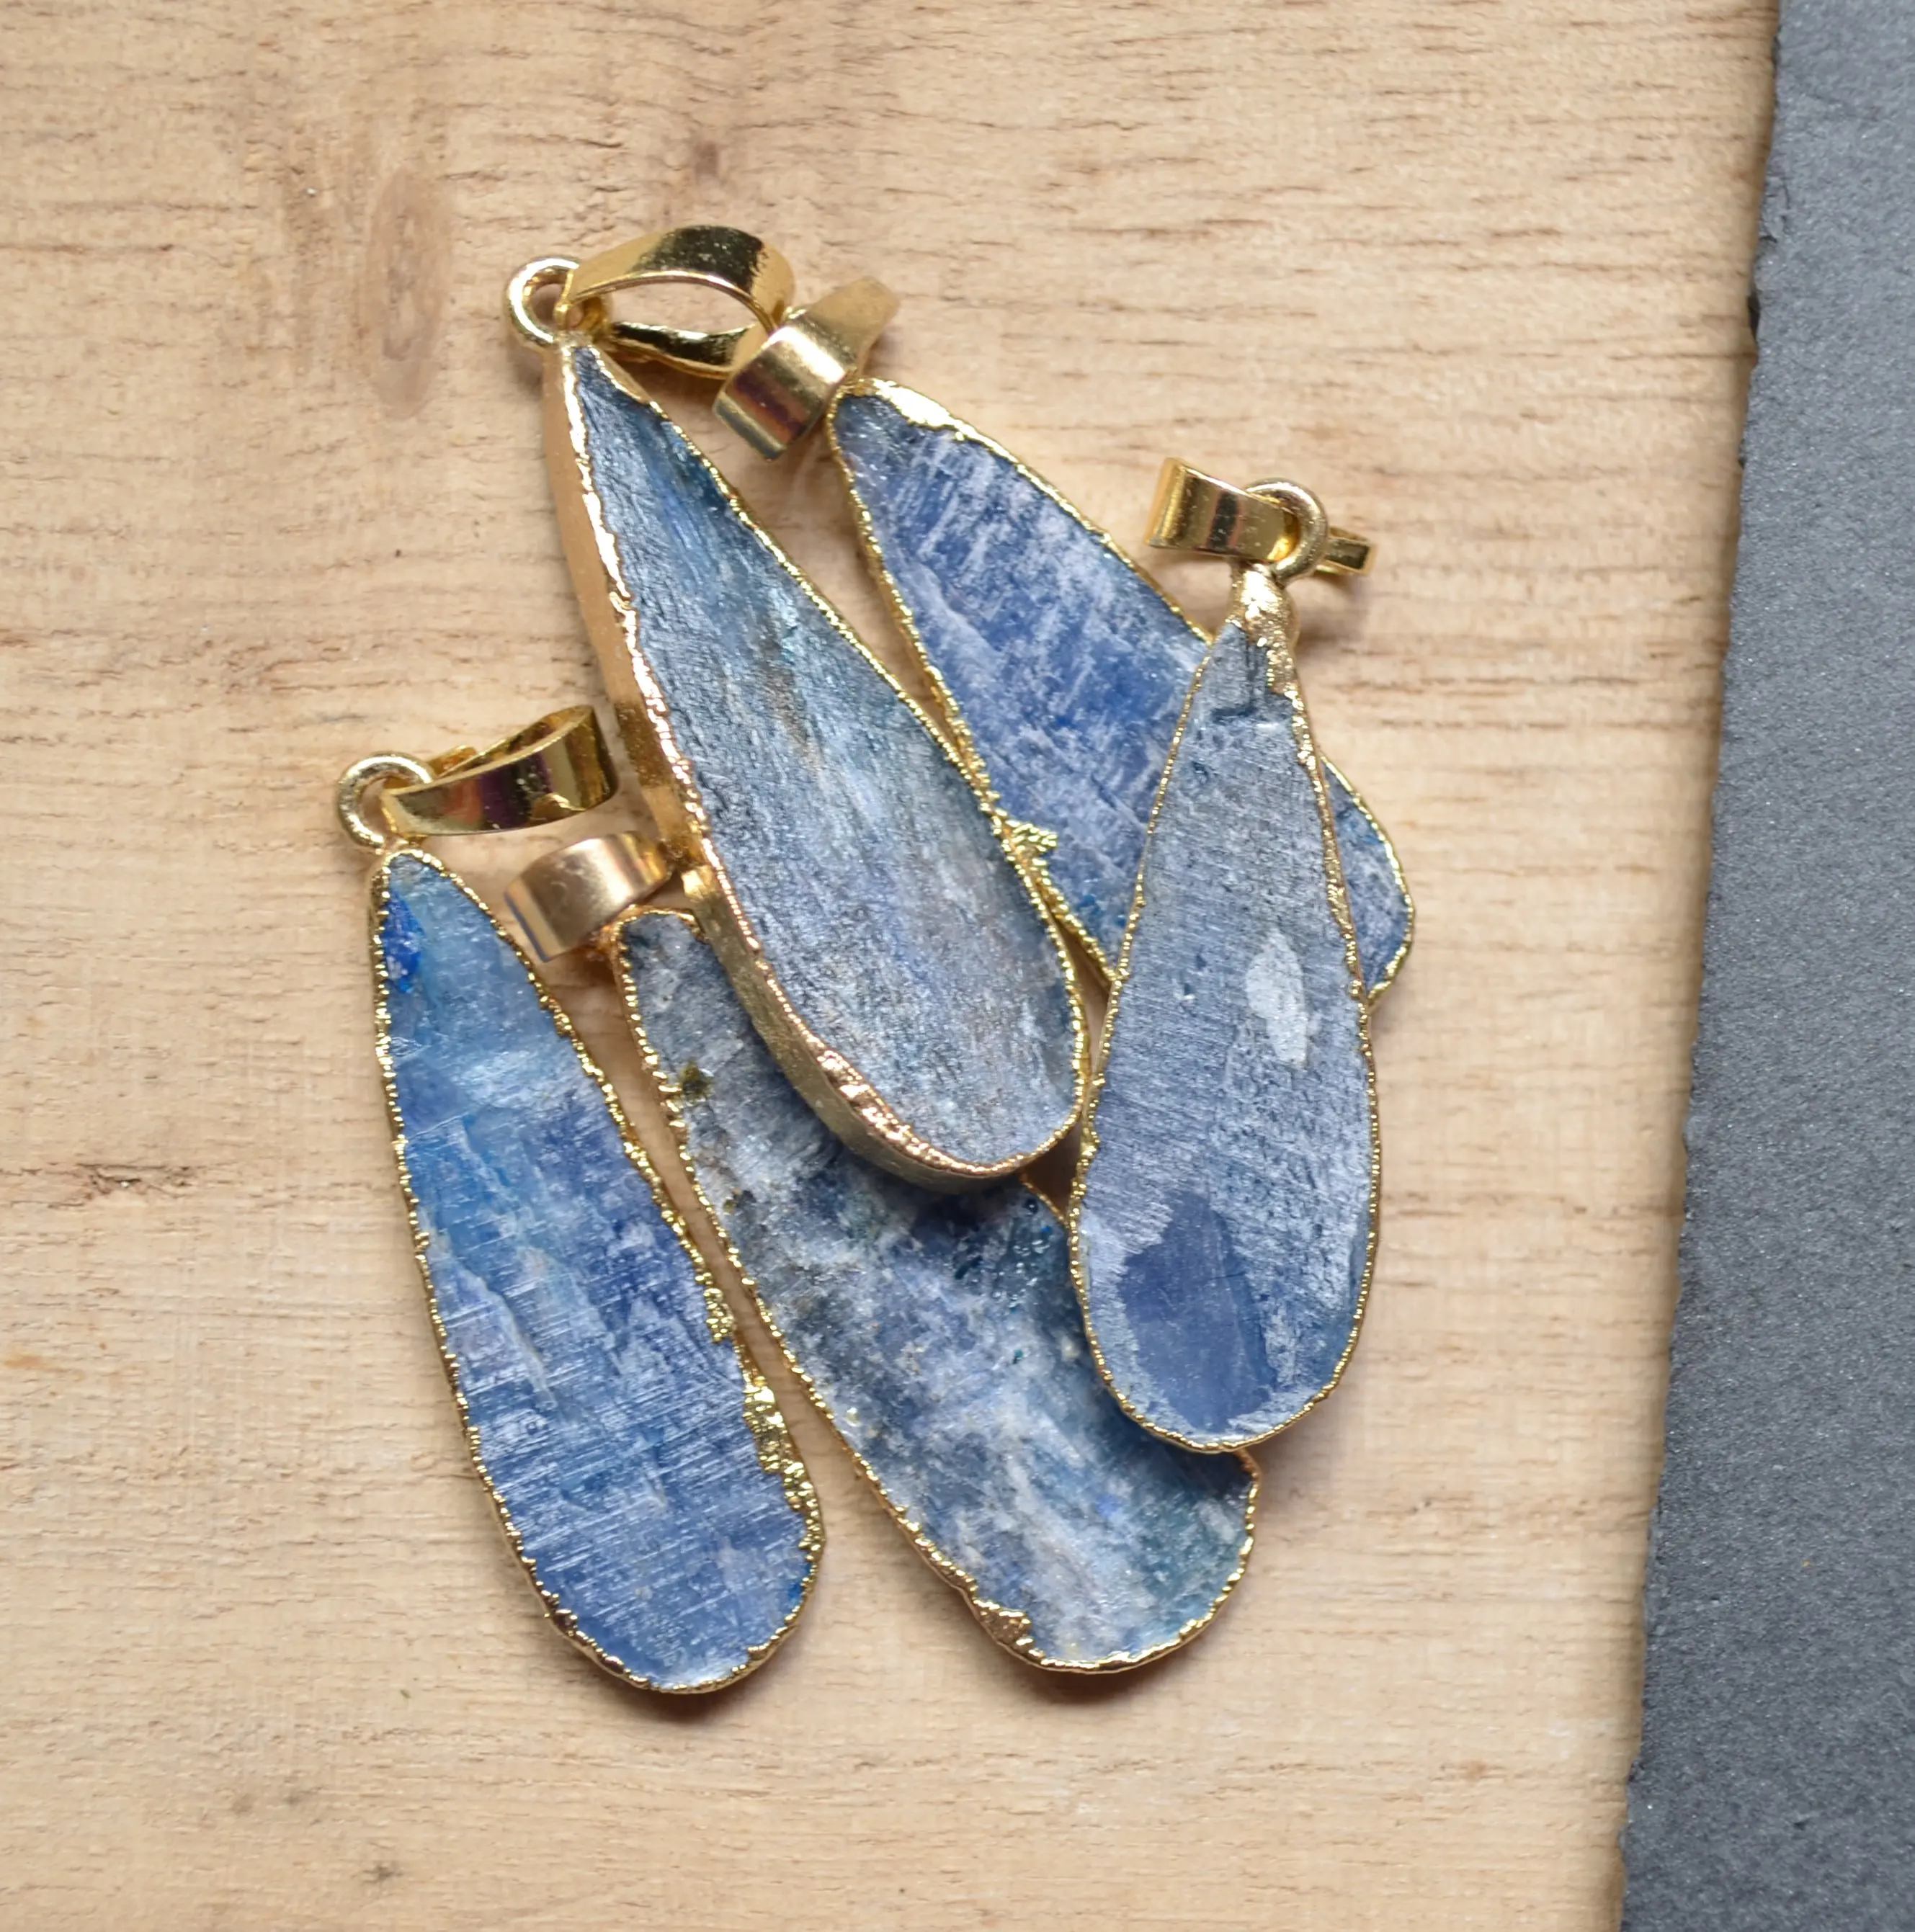 

Raw Blue kyanite water drop shape pendant with gold electroplated edges